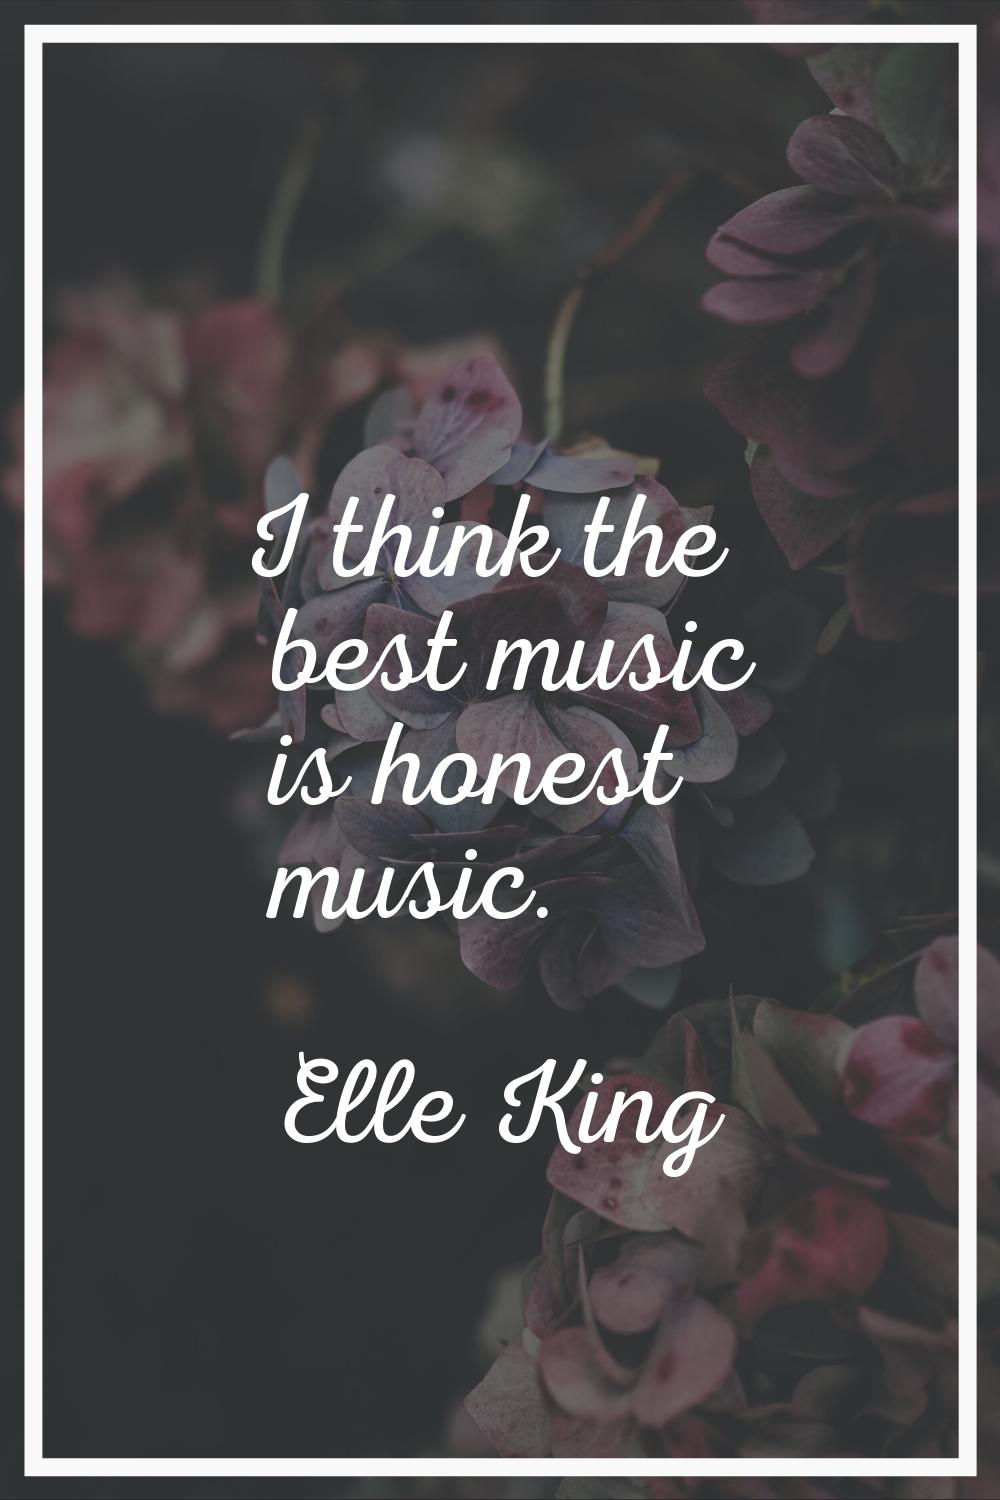 I think the best music is honest music.